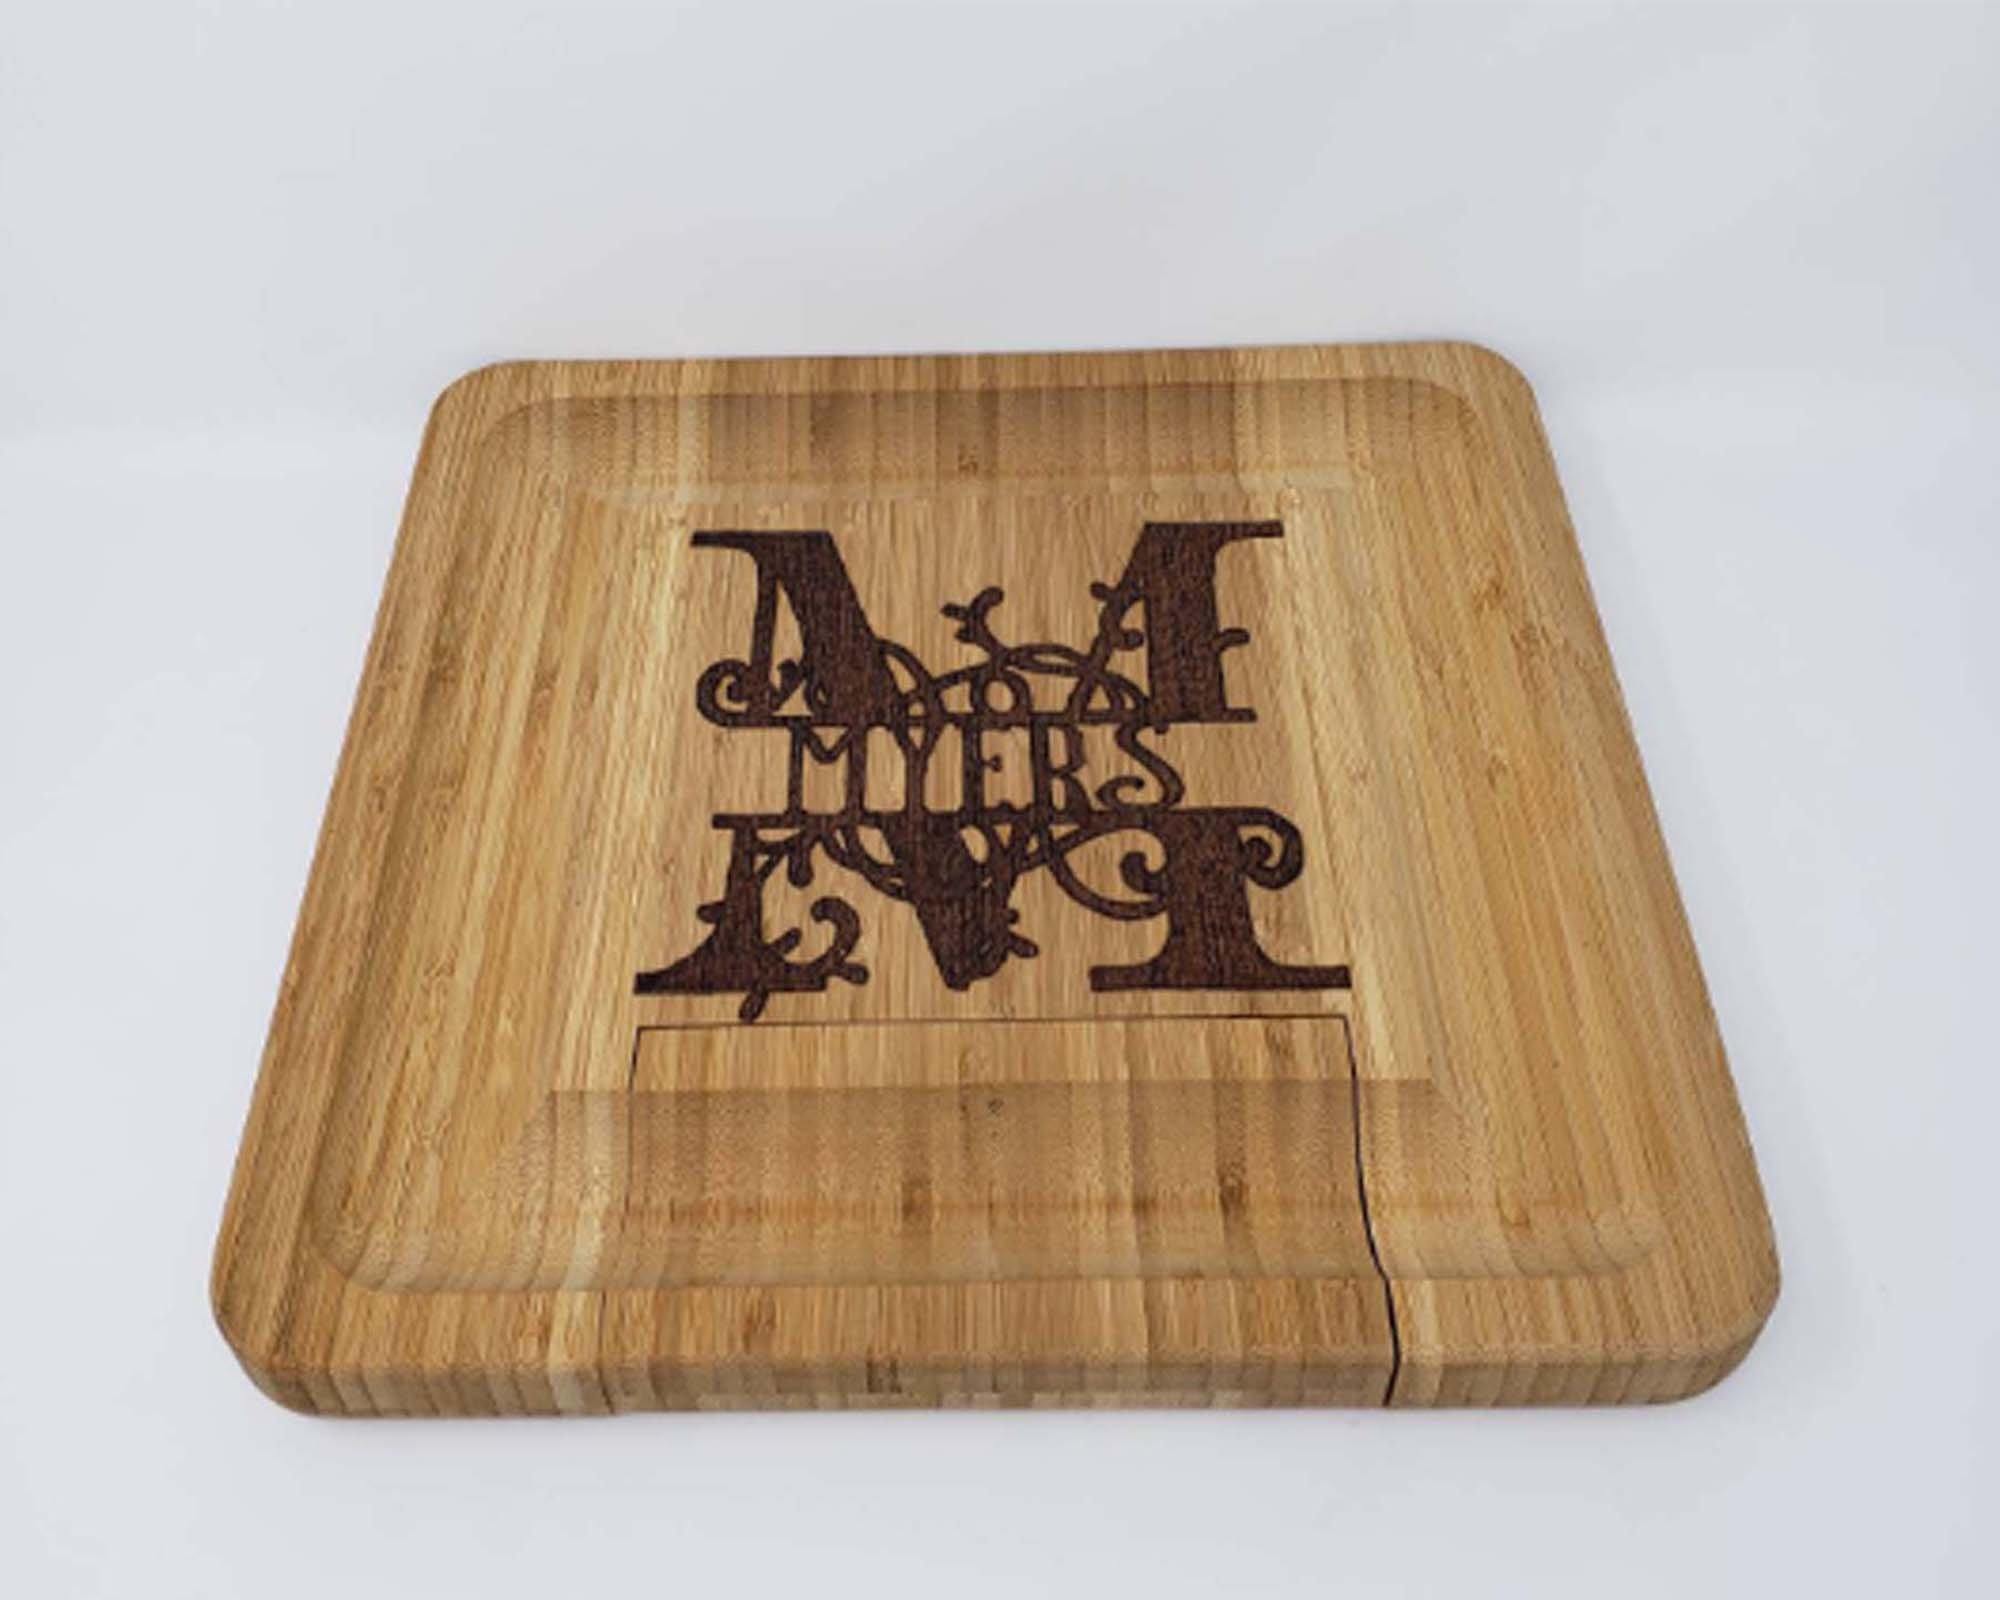 Monogrammed Cheese board | Personalized Cheese Board Set | Custom Cheese Board | Wooden Cheese Board | Charcuterie Board - This & That Solutions - Monogrammed Cheese board | Personalized Cheese Board Set | Custom Cheese Board | Wooden Cheese Board | Charcuterie Board - Personalized Gifts & Custom Home Decor